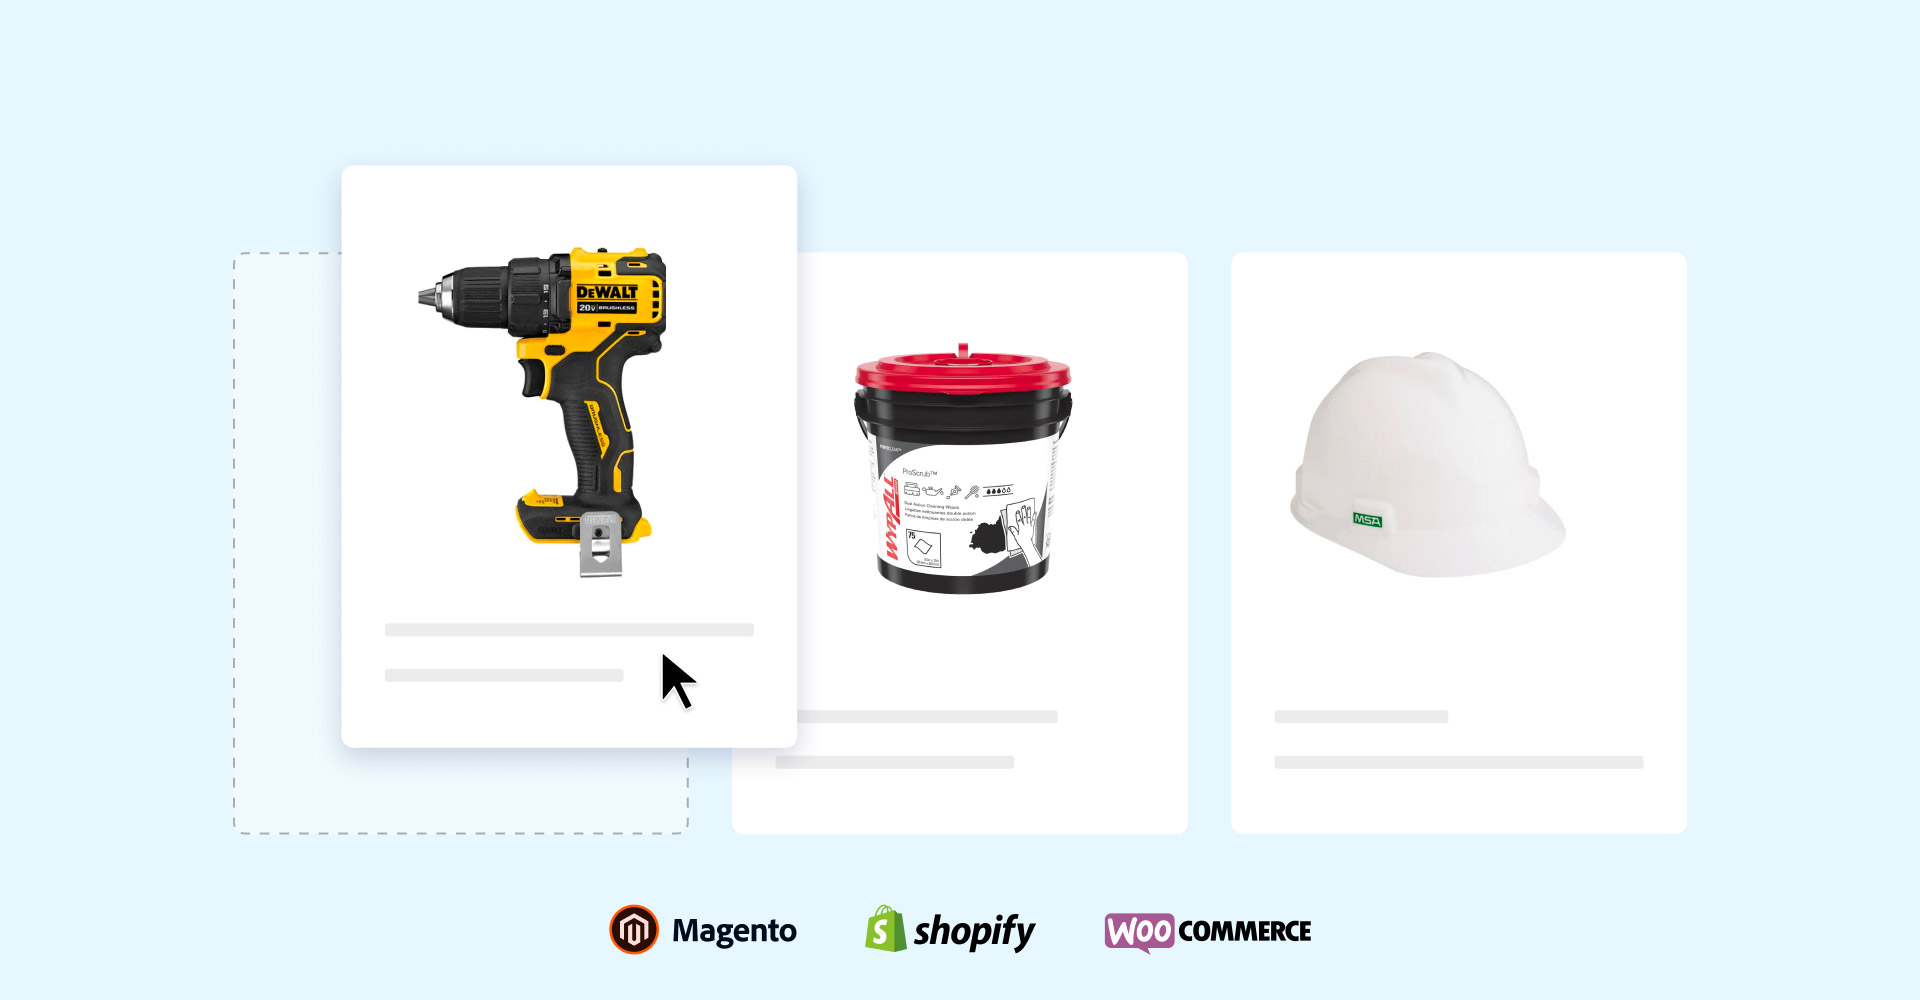 Supplies And Equipment, Visual Product Merchandising Tool for eCommerce